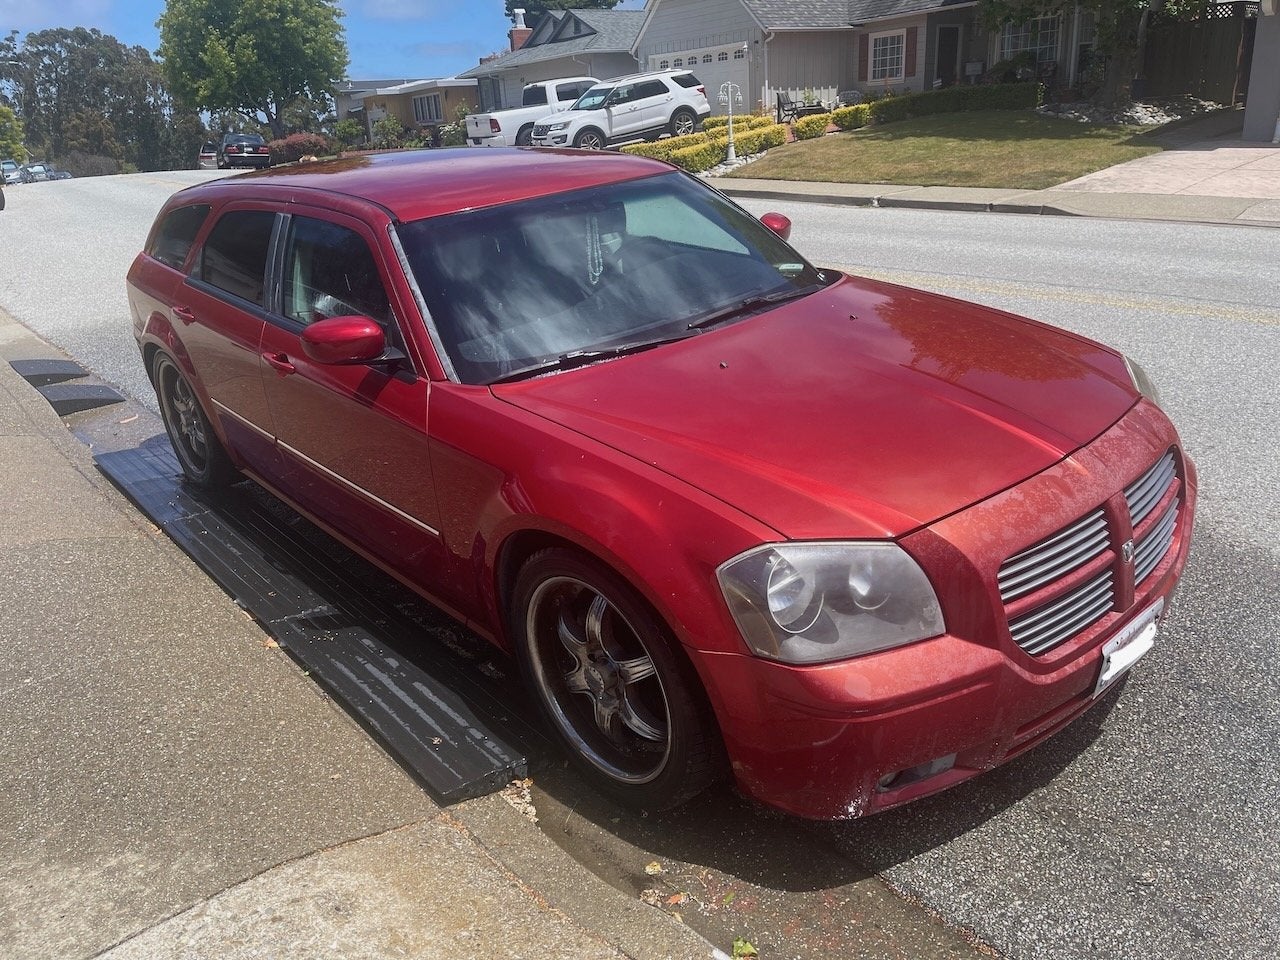 2005 Dodge Magnum SXT with upgraded parts/components